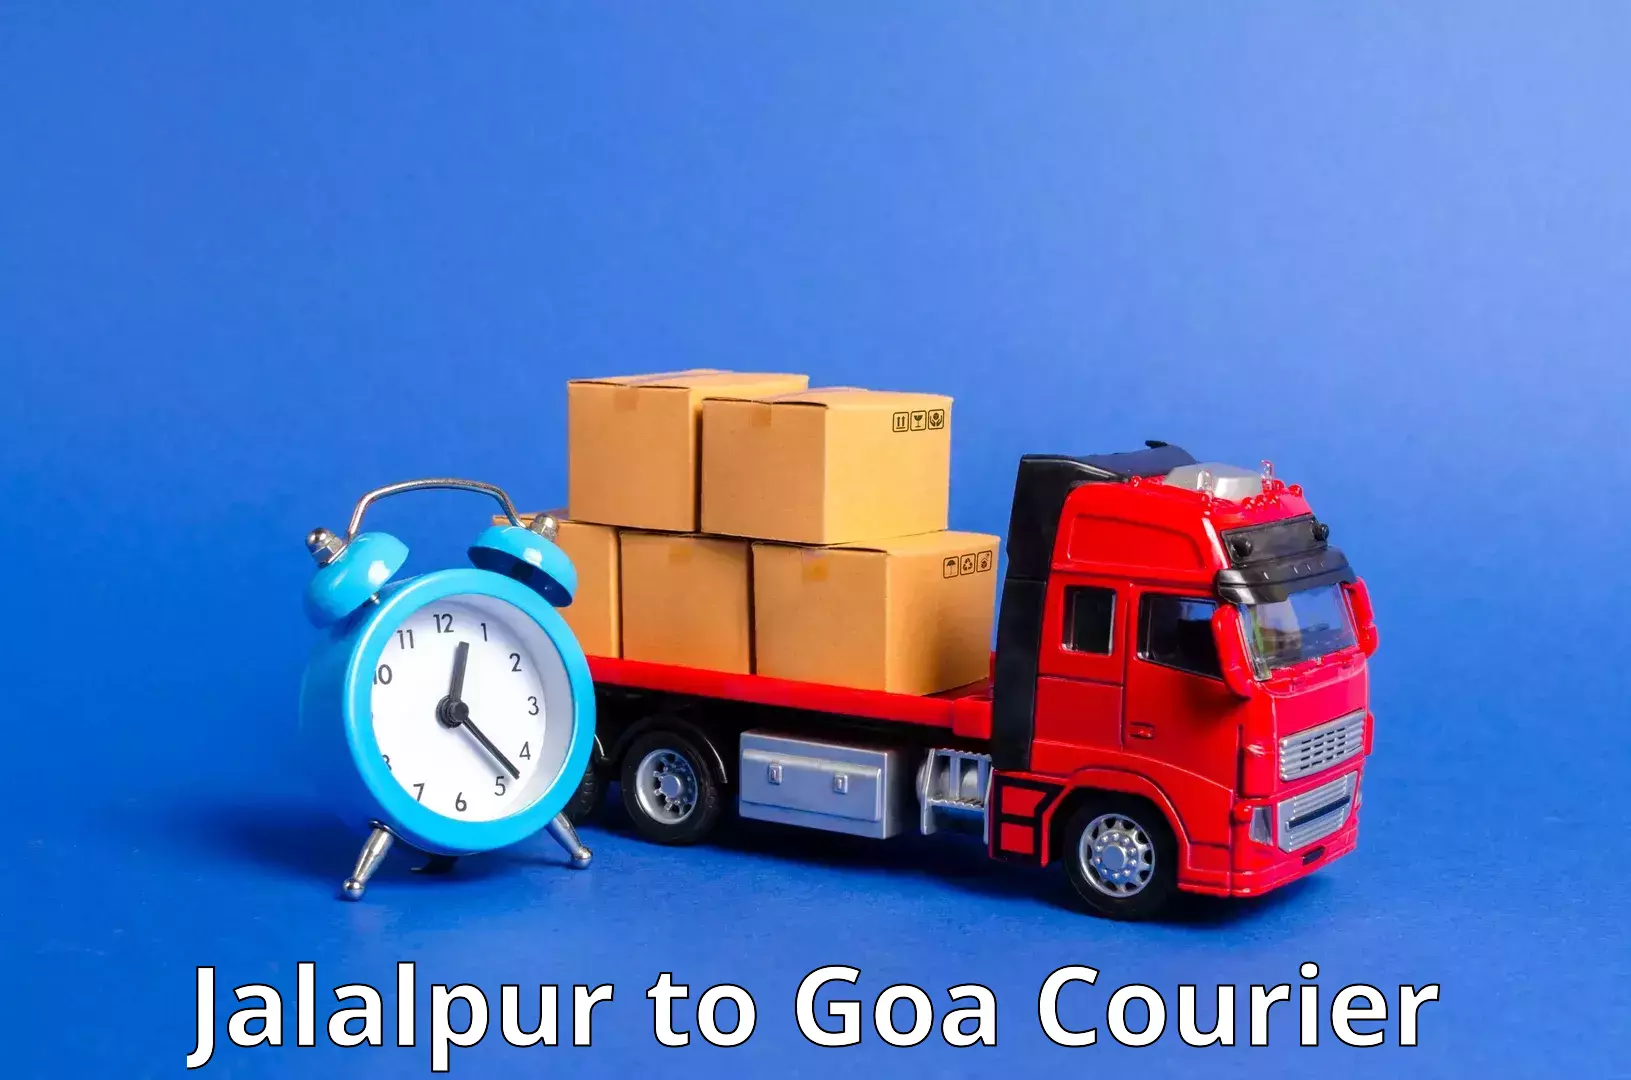 Courier services in Jalalpur to Panaji